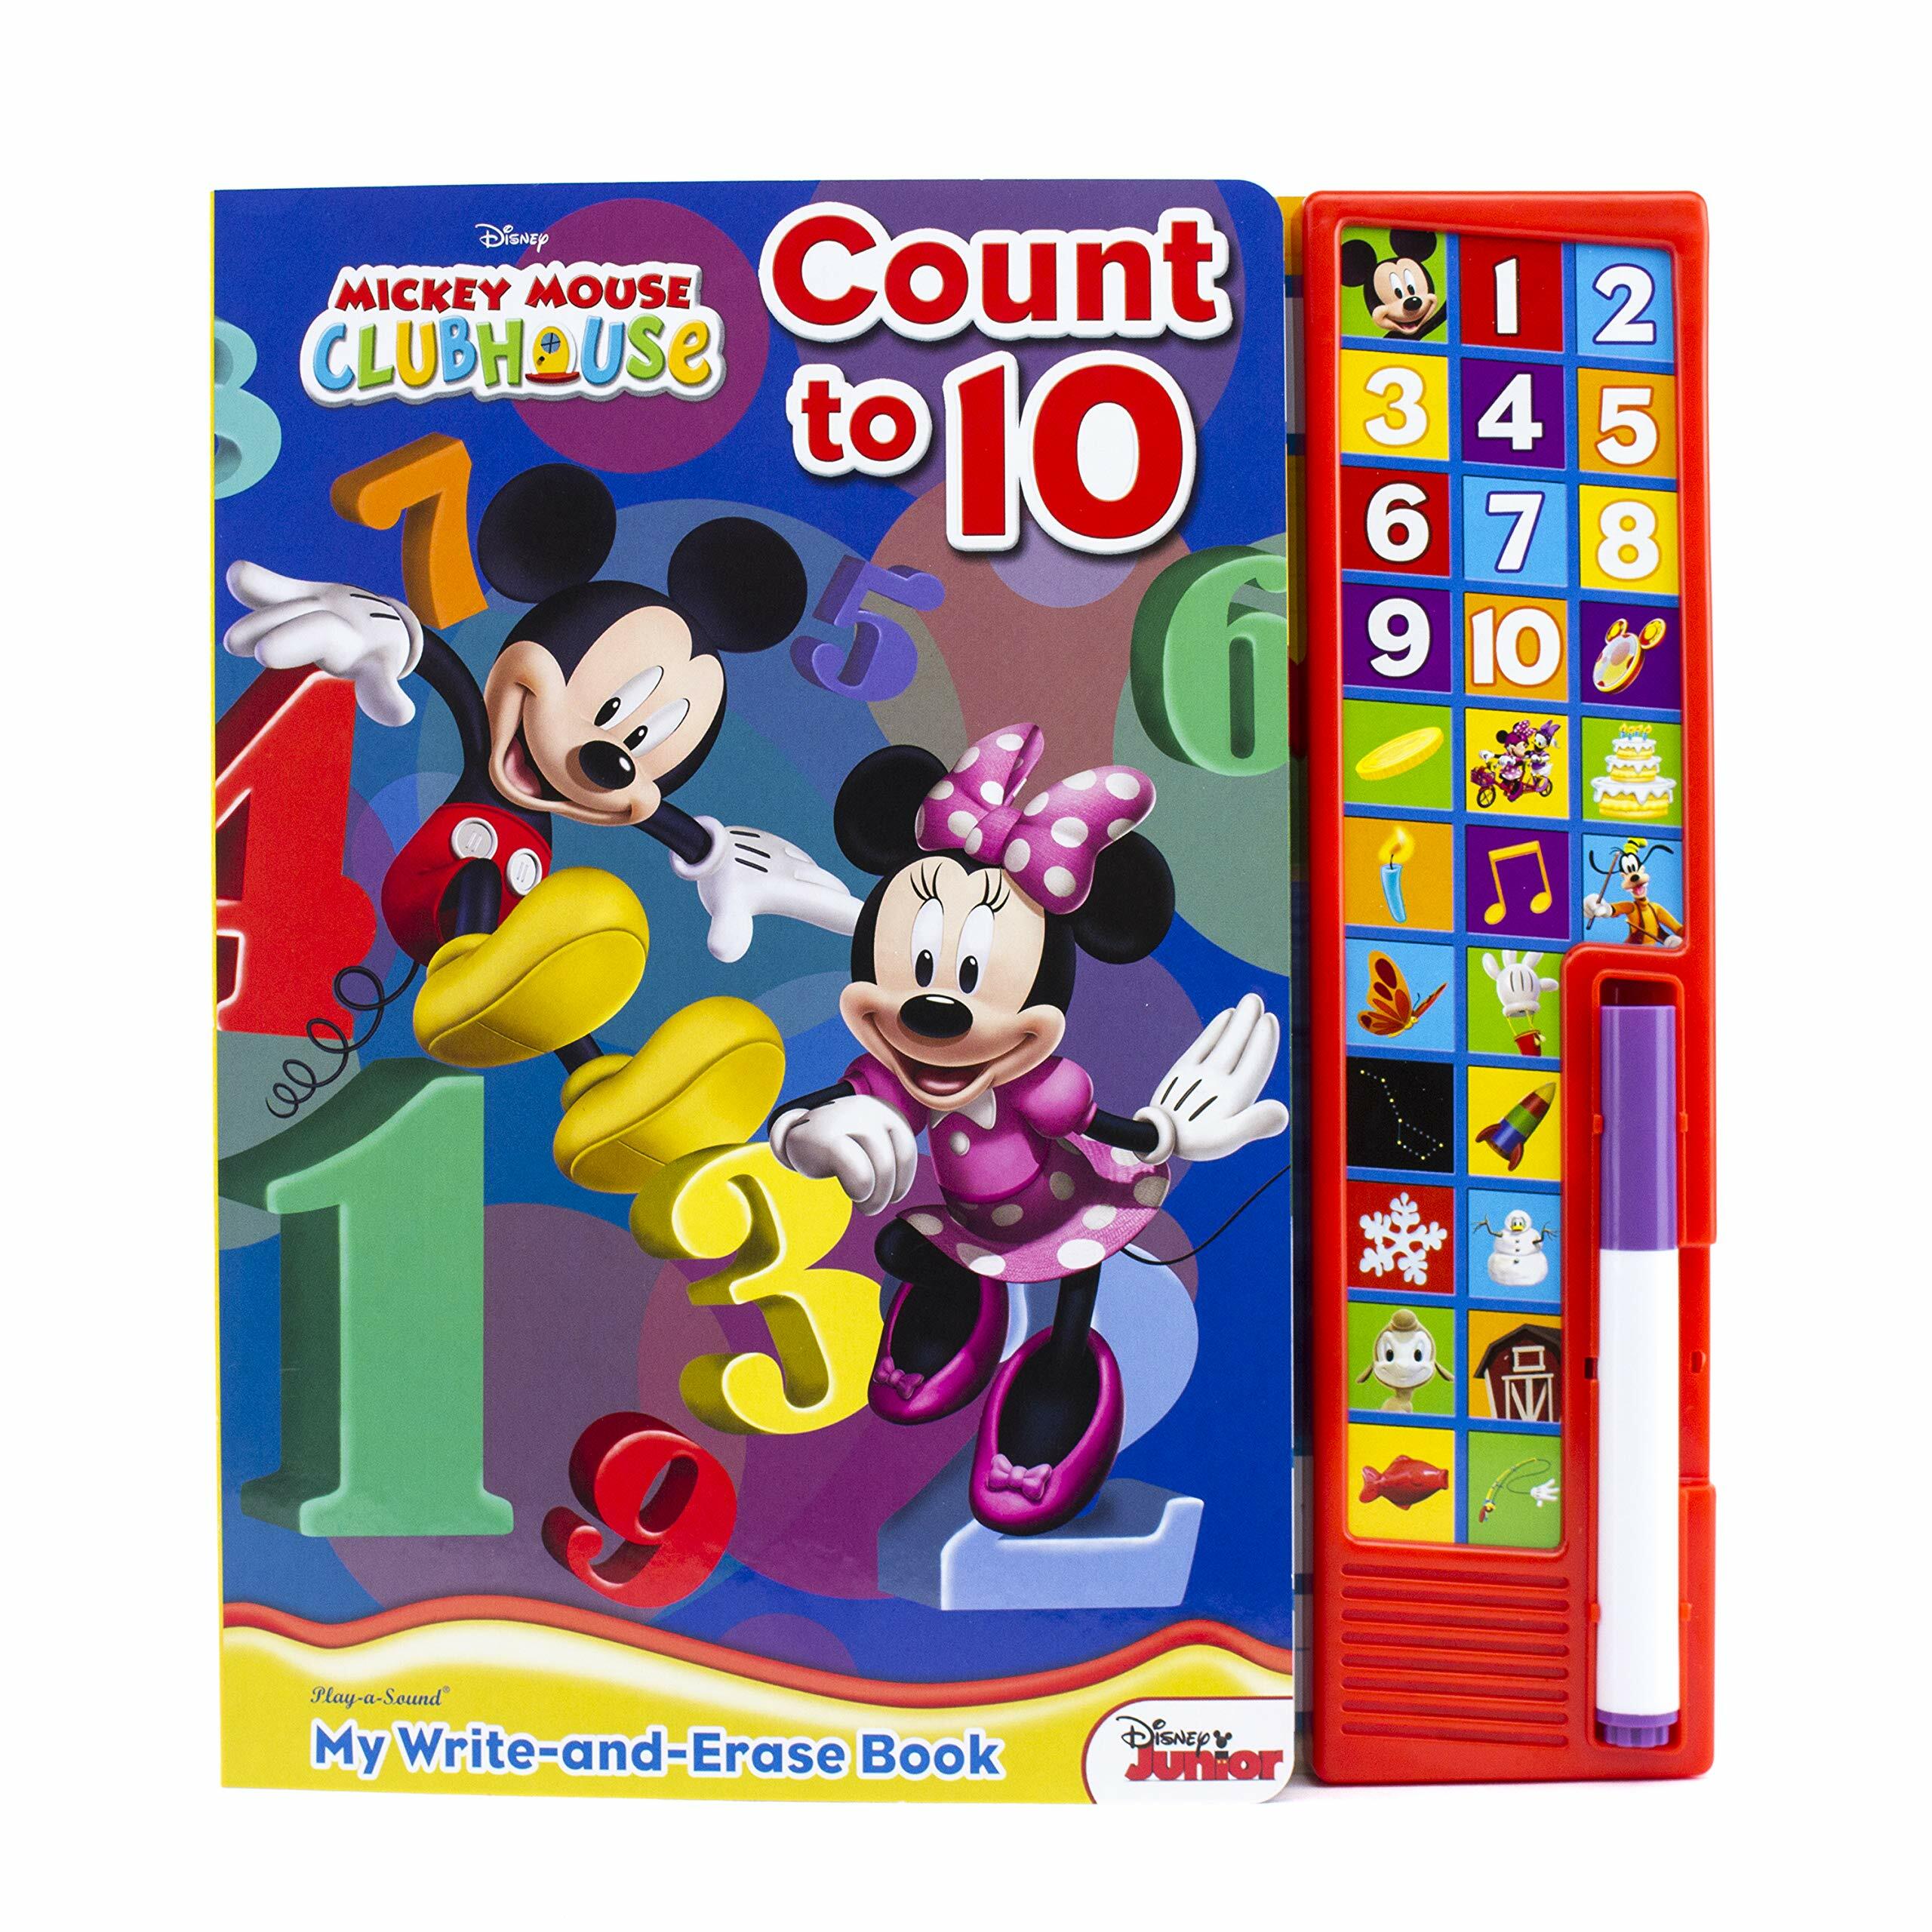 My Write-and-Erase Sound Book: Disney Mickey Mouse Clubhouse Count to 10 (Board book)